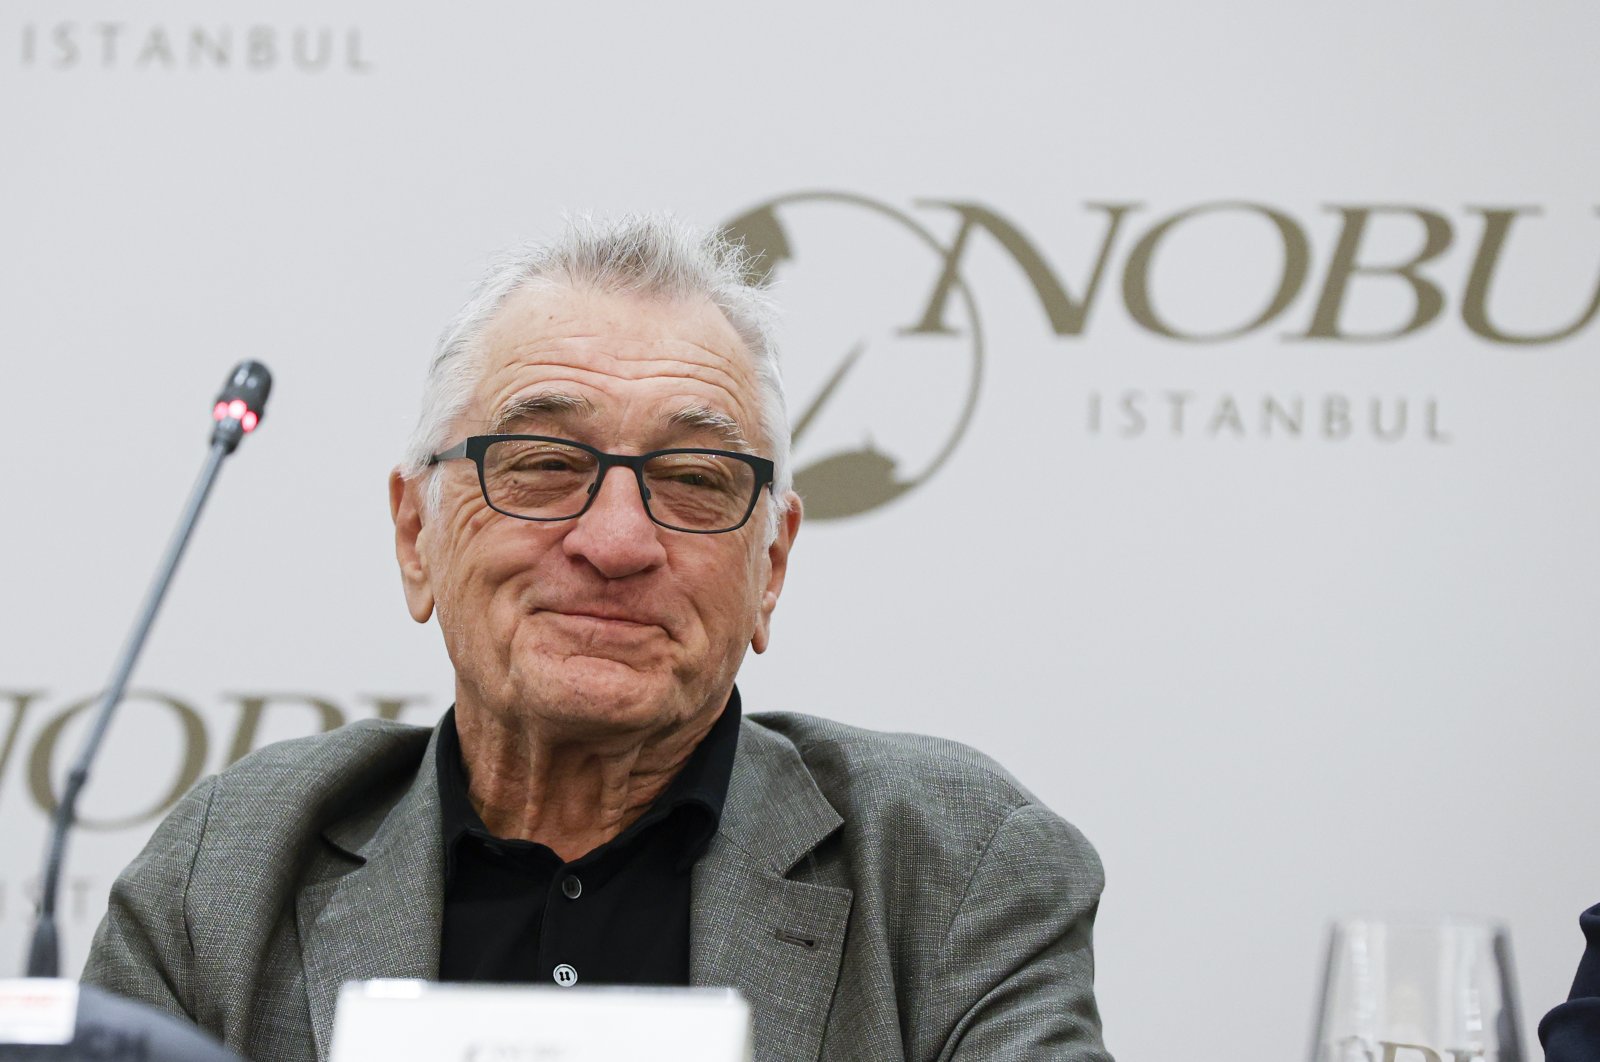 Actor Robert De Niro attends a press conference in Istanbul, Turkey, June 26, 2022. (AA Photo)